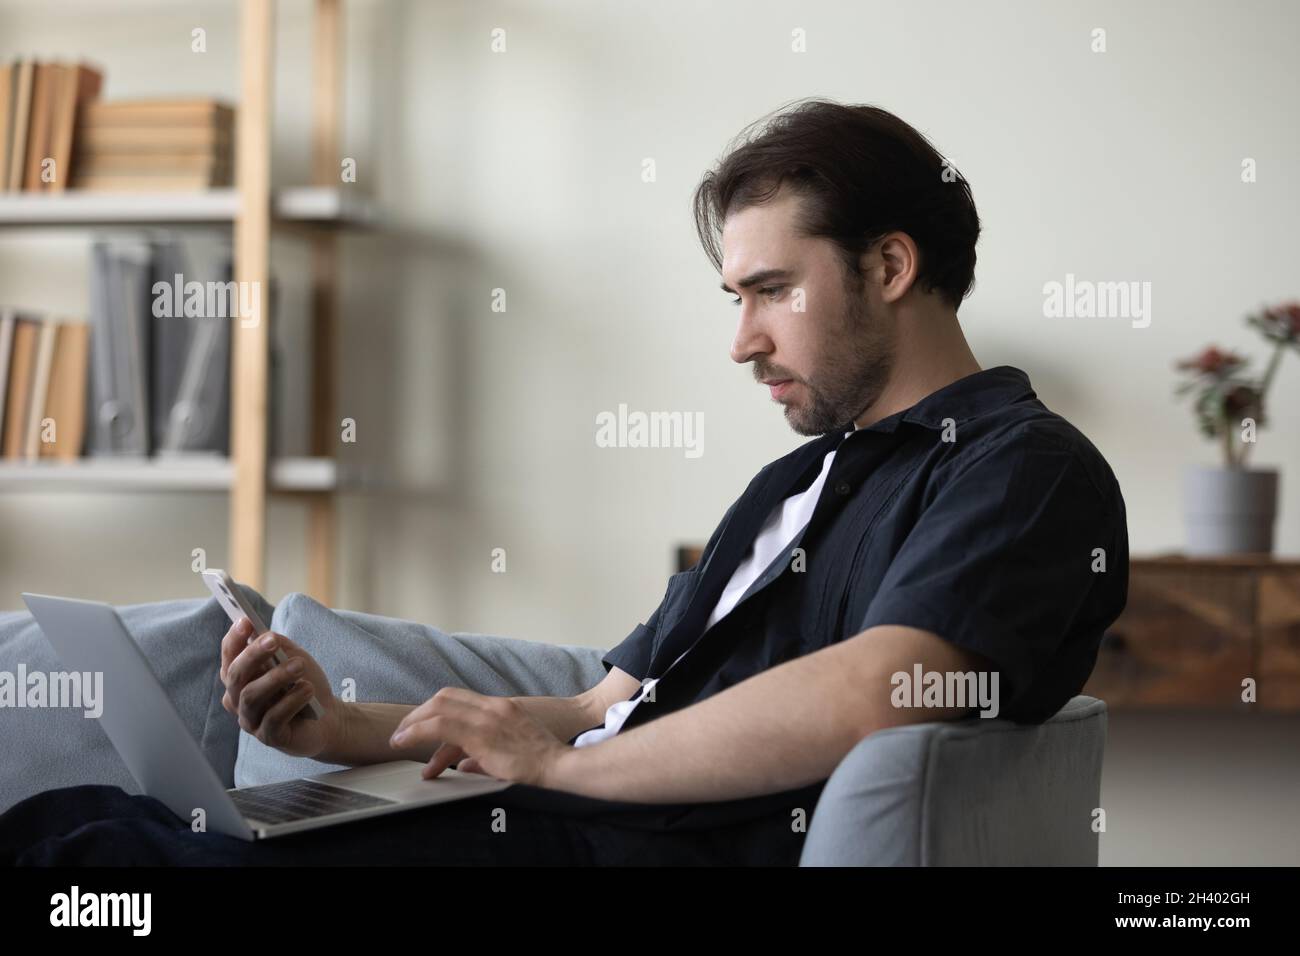 Addicted to modern technology young man using different gadgets. Stock Photo